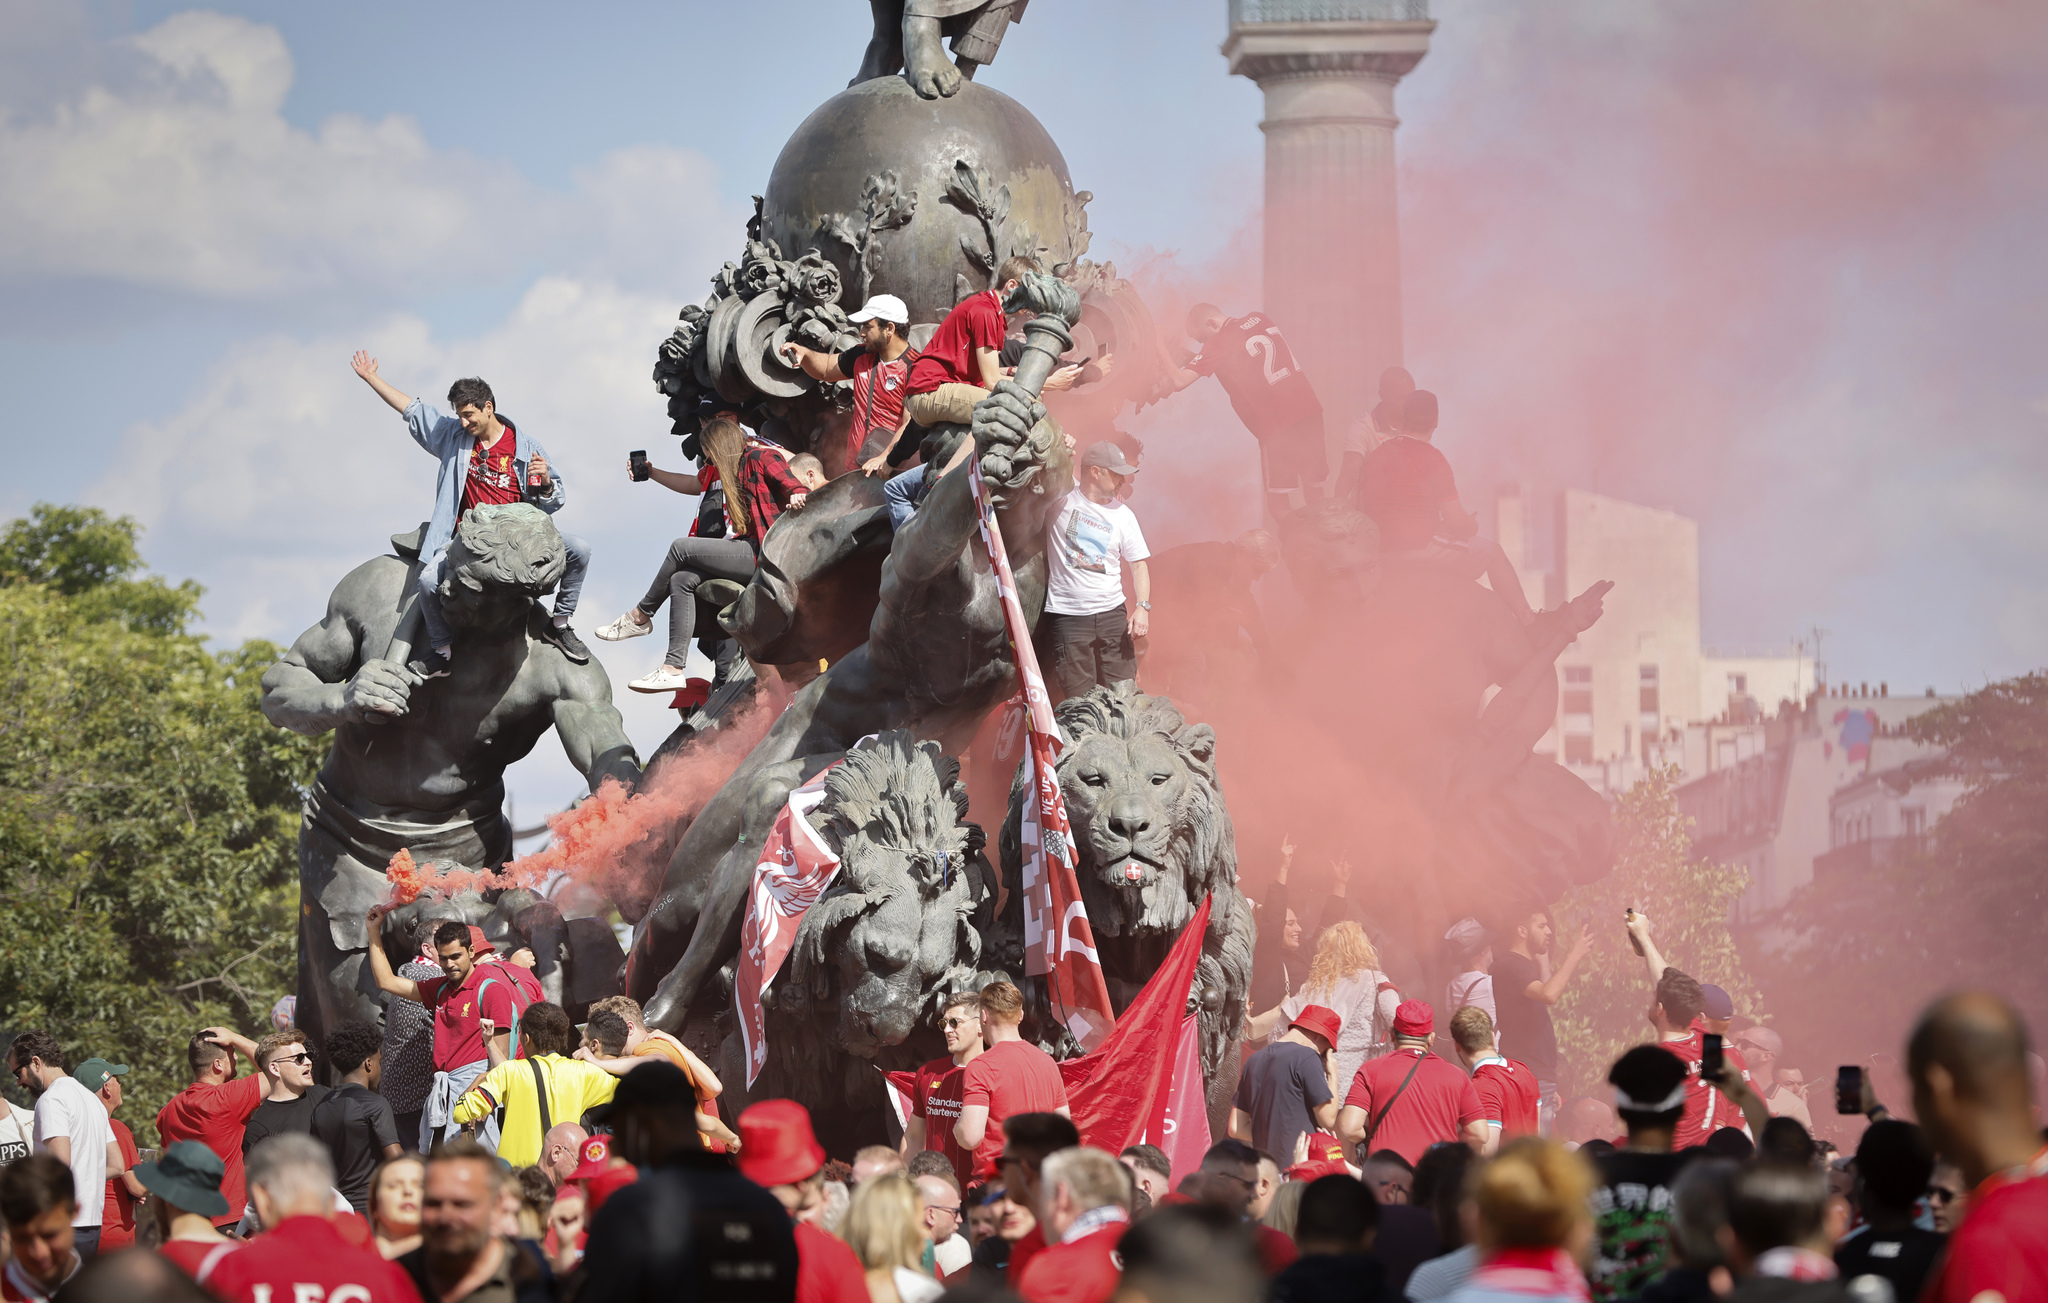 Liverpool supporters gather in Paris, Saturday, May 28, 2022 ahead of Saturday's  lt;HIT gt;Champions lt;/HIT gt;  lt;HIT gt;League lt;/HIT gt; final soccer match between Liverpool and Real Madrid at the Stade de France. (AP Photo/Jean-Francois Badias)